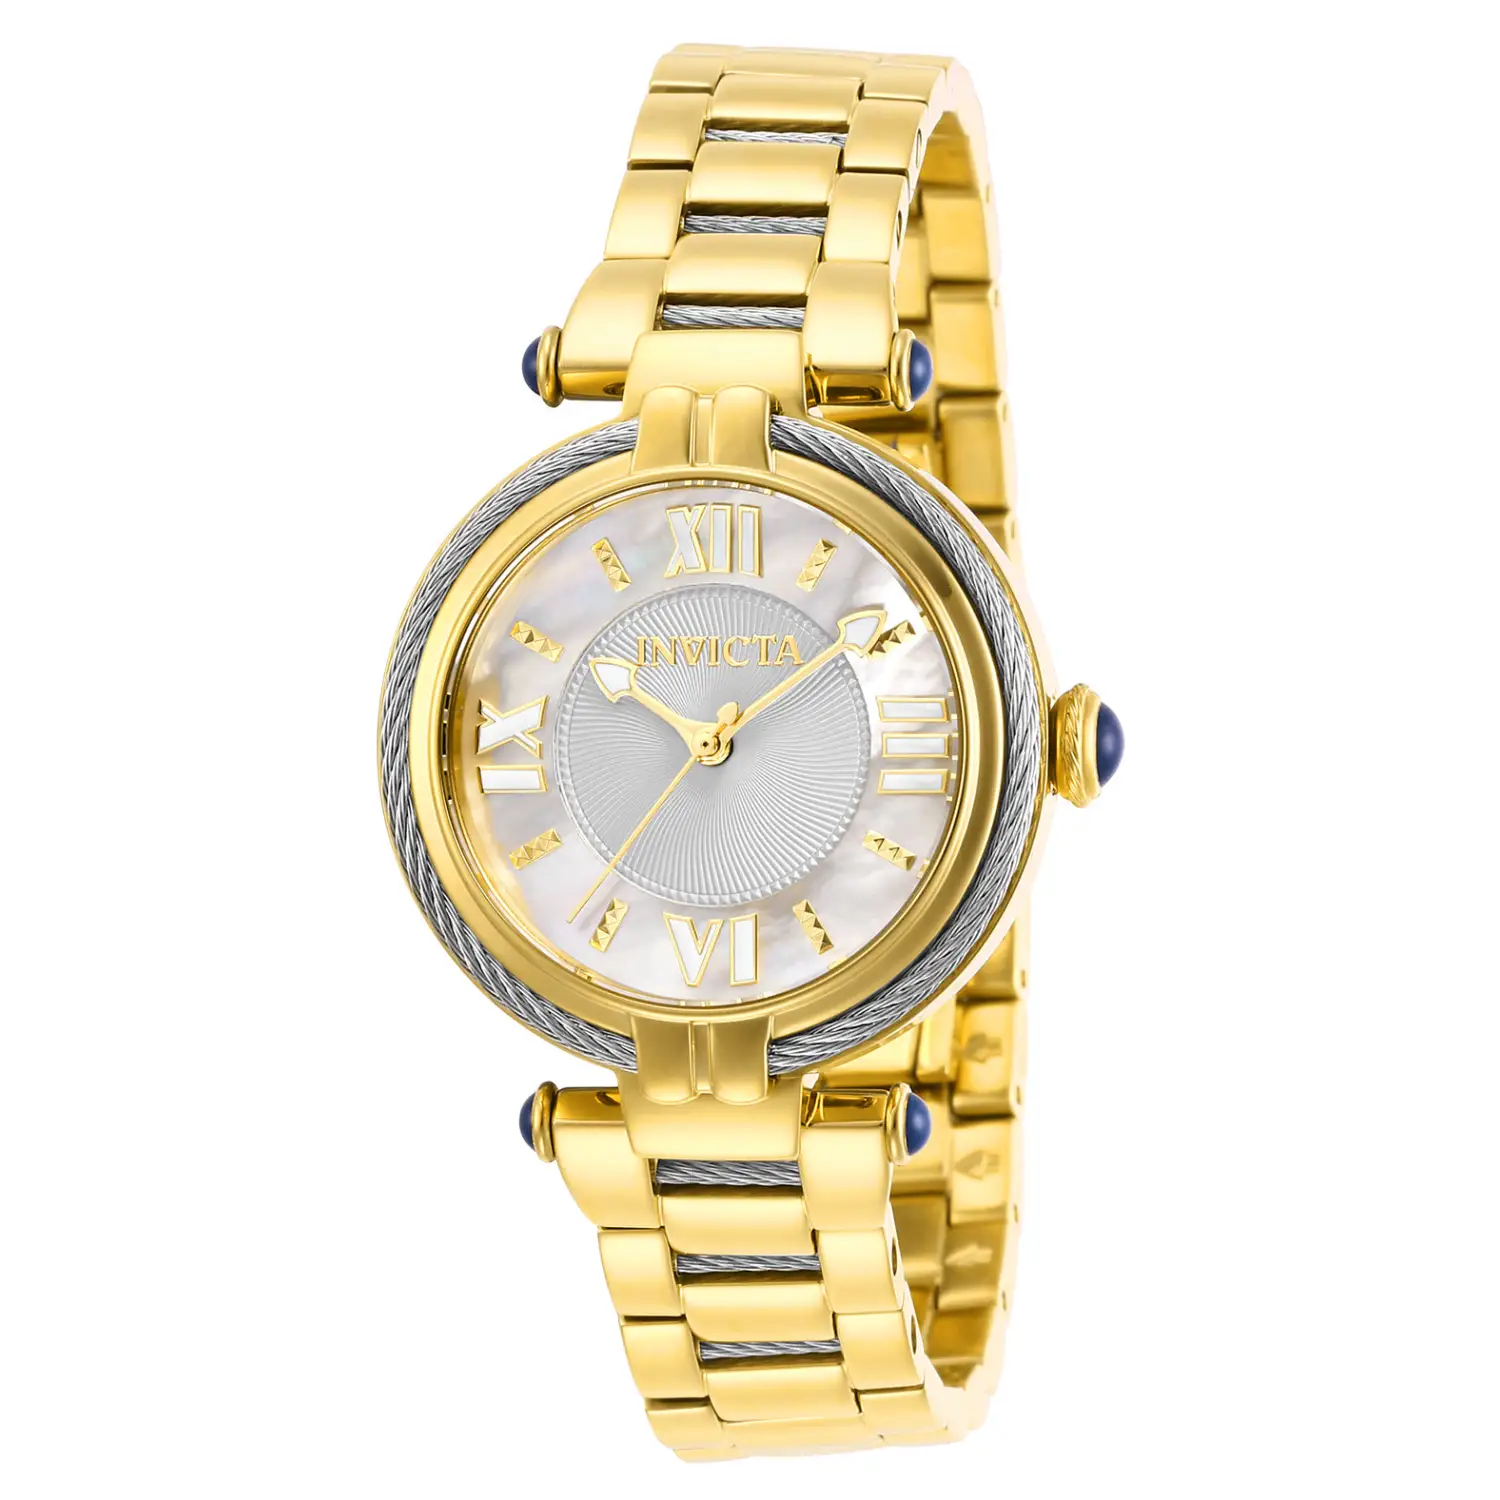 Invicta Women’s Bolt Quartz Stainless Steel Gold Plated